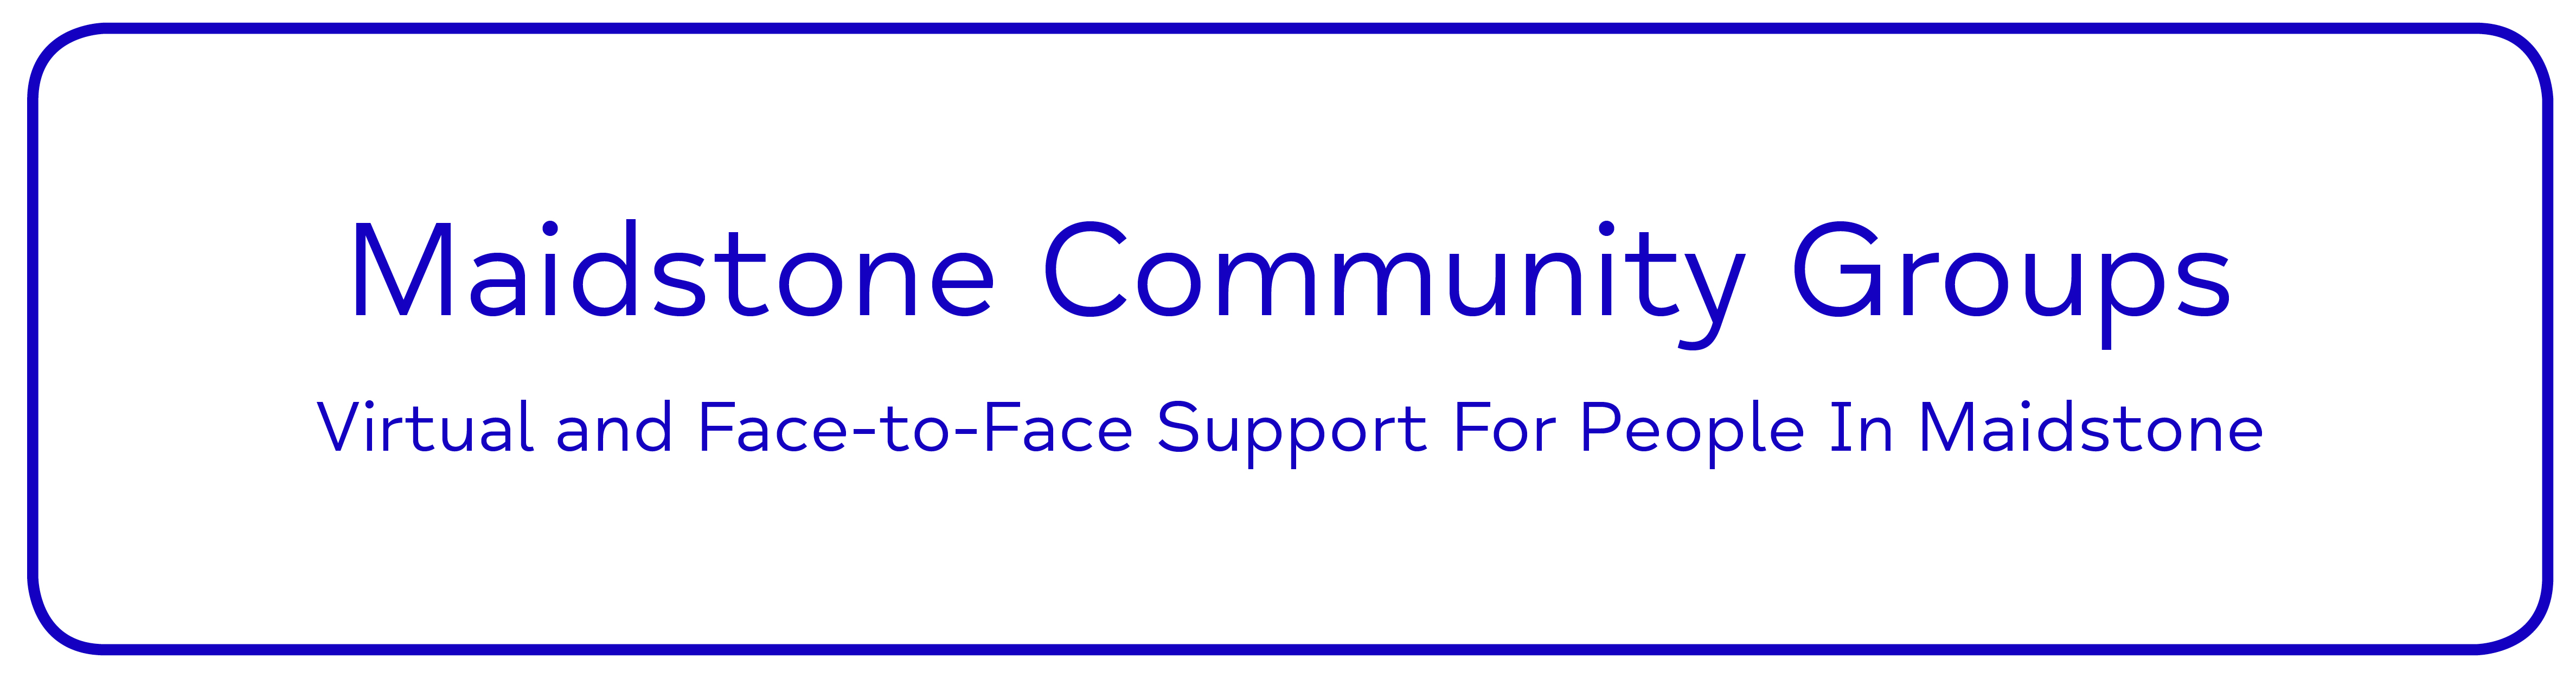 Maidstone Community Groups Virtual and Face-to-Face Support For People In Maidstone